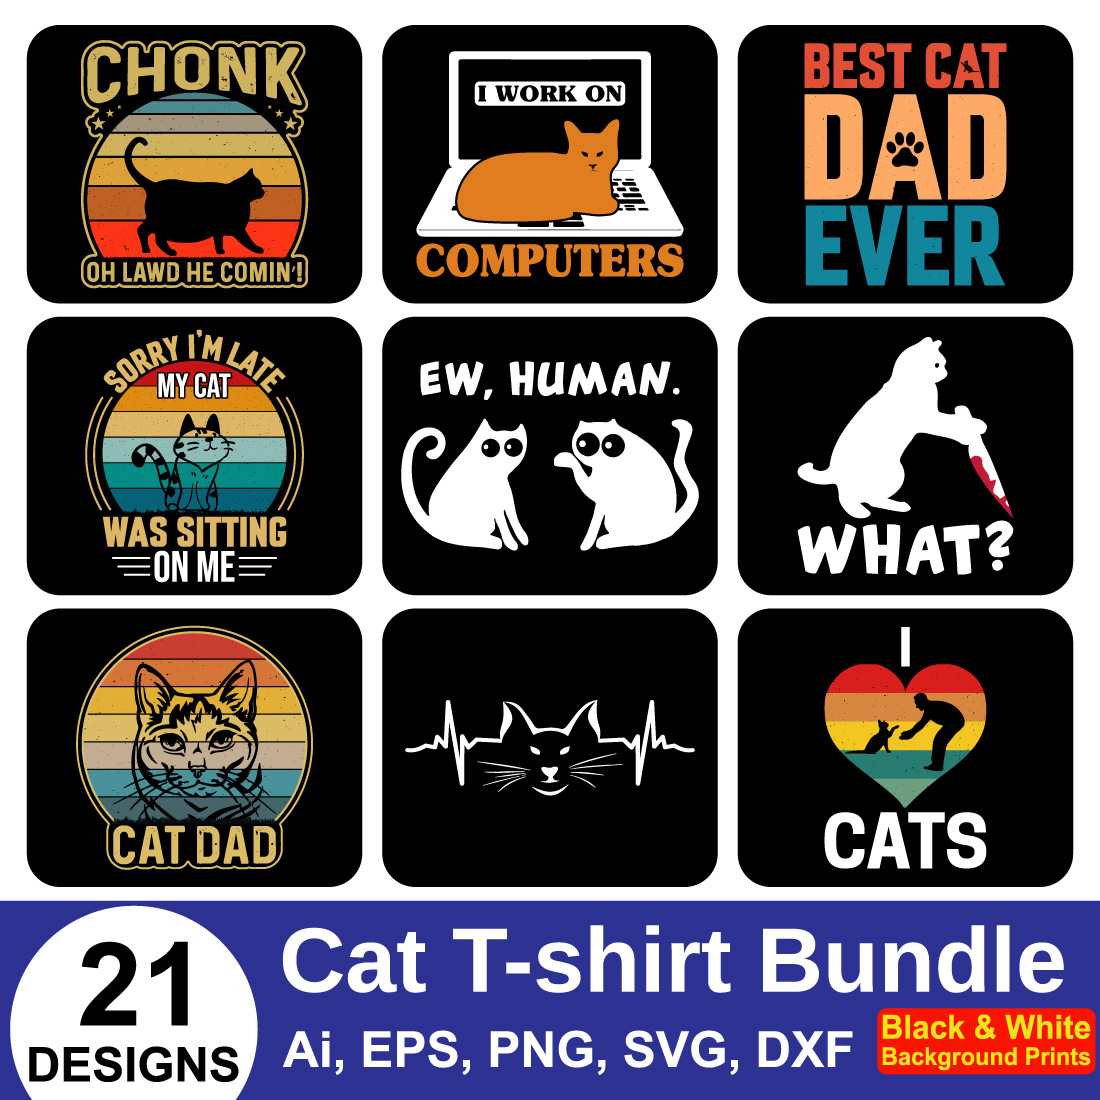 Funny Cat Lover Typography T-Shirt Design main cover.